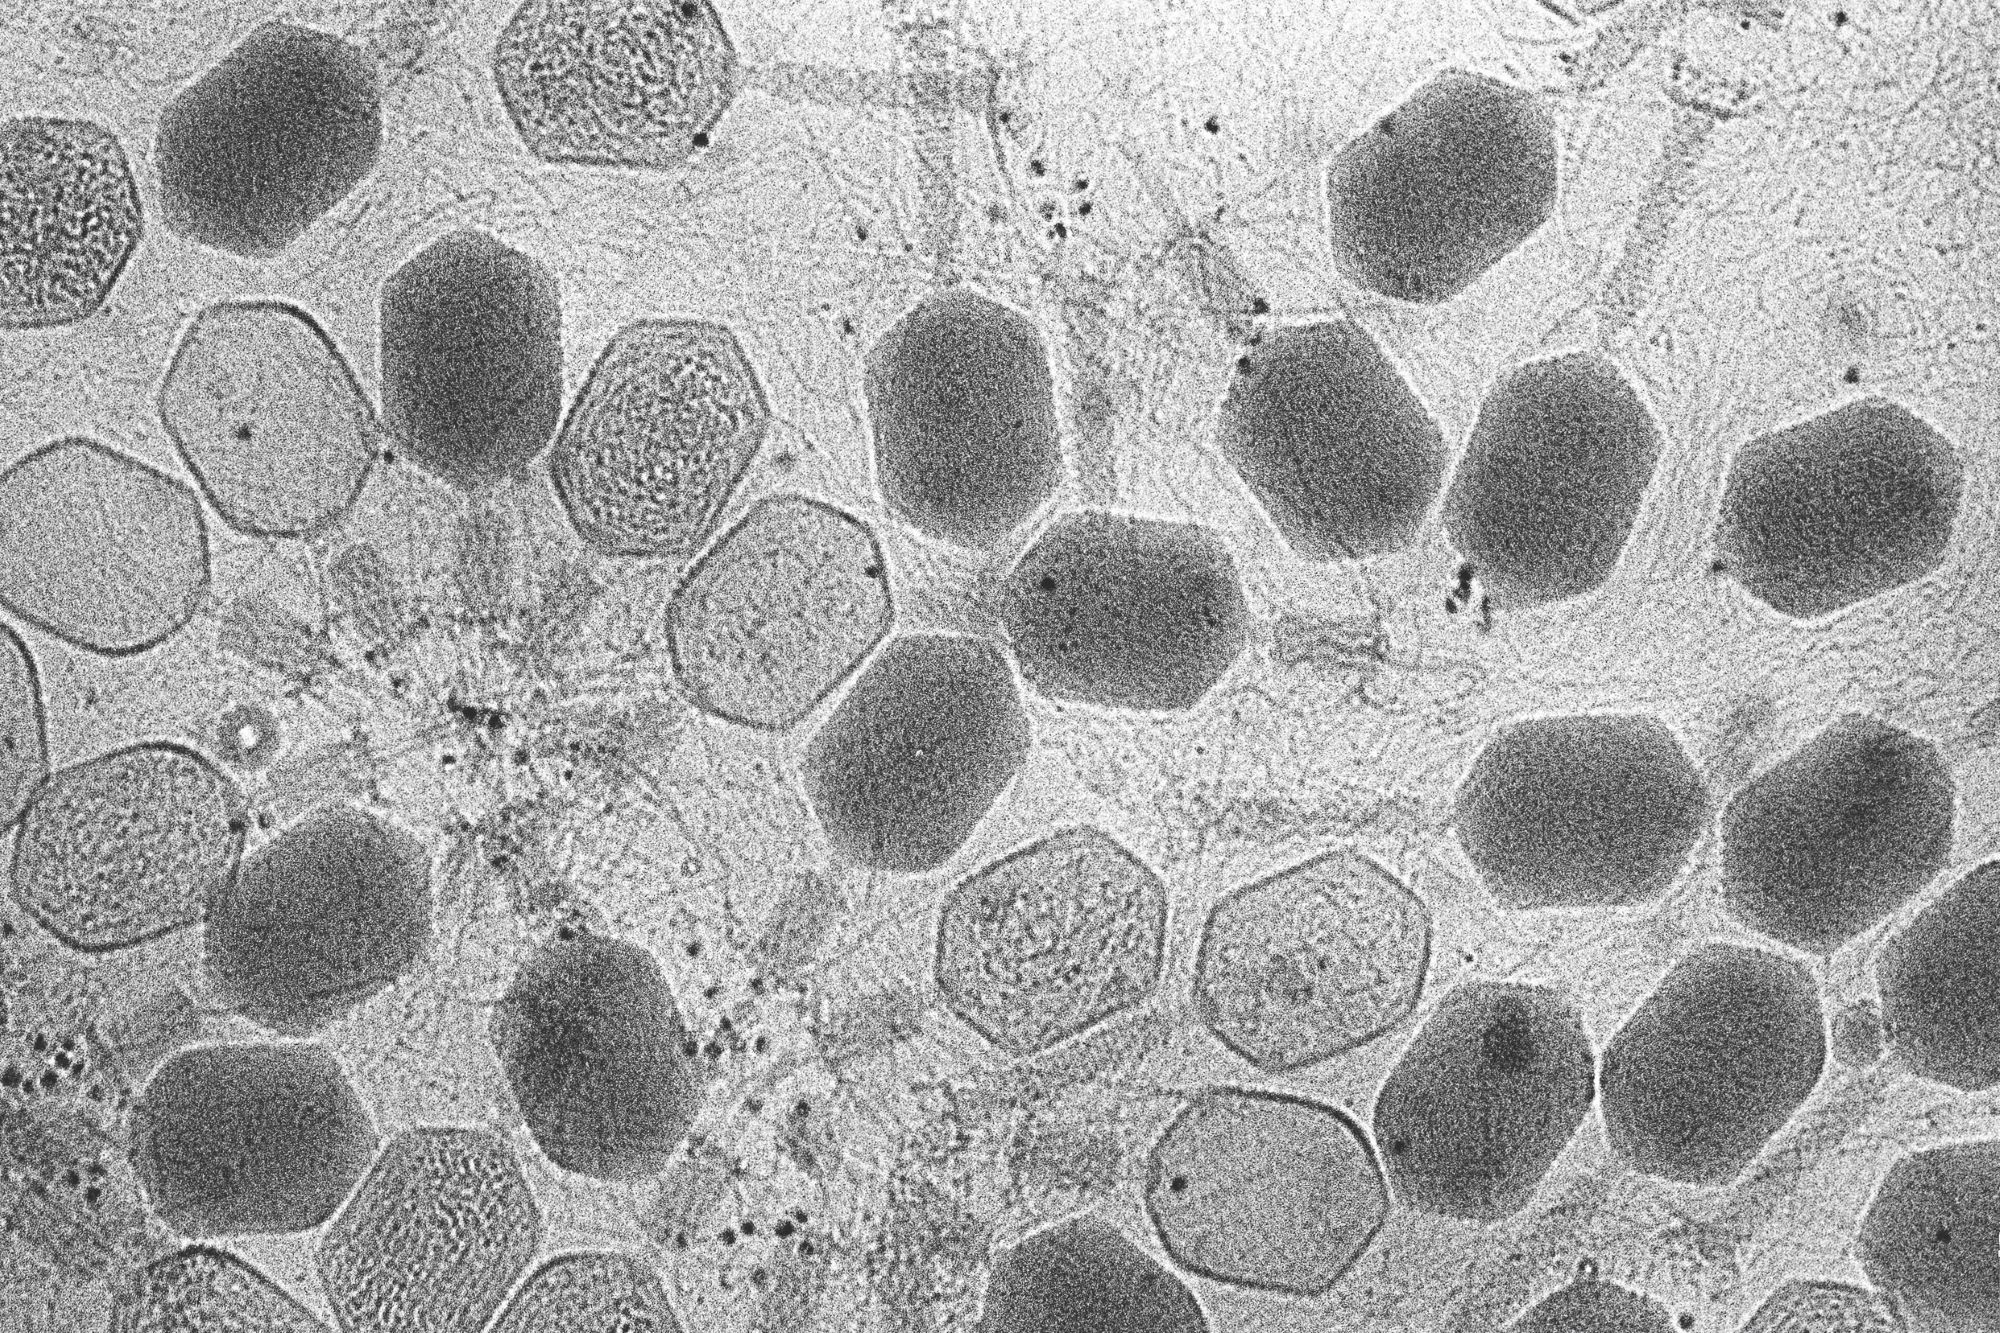 A microscope image of a group of phages 